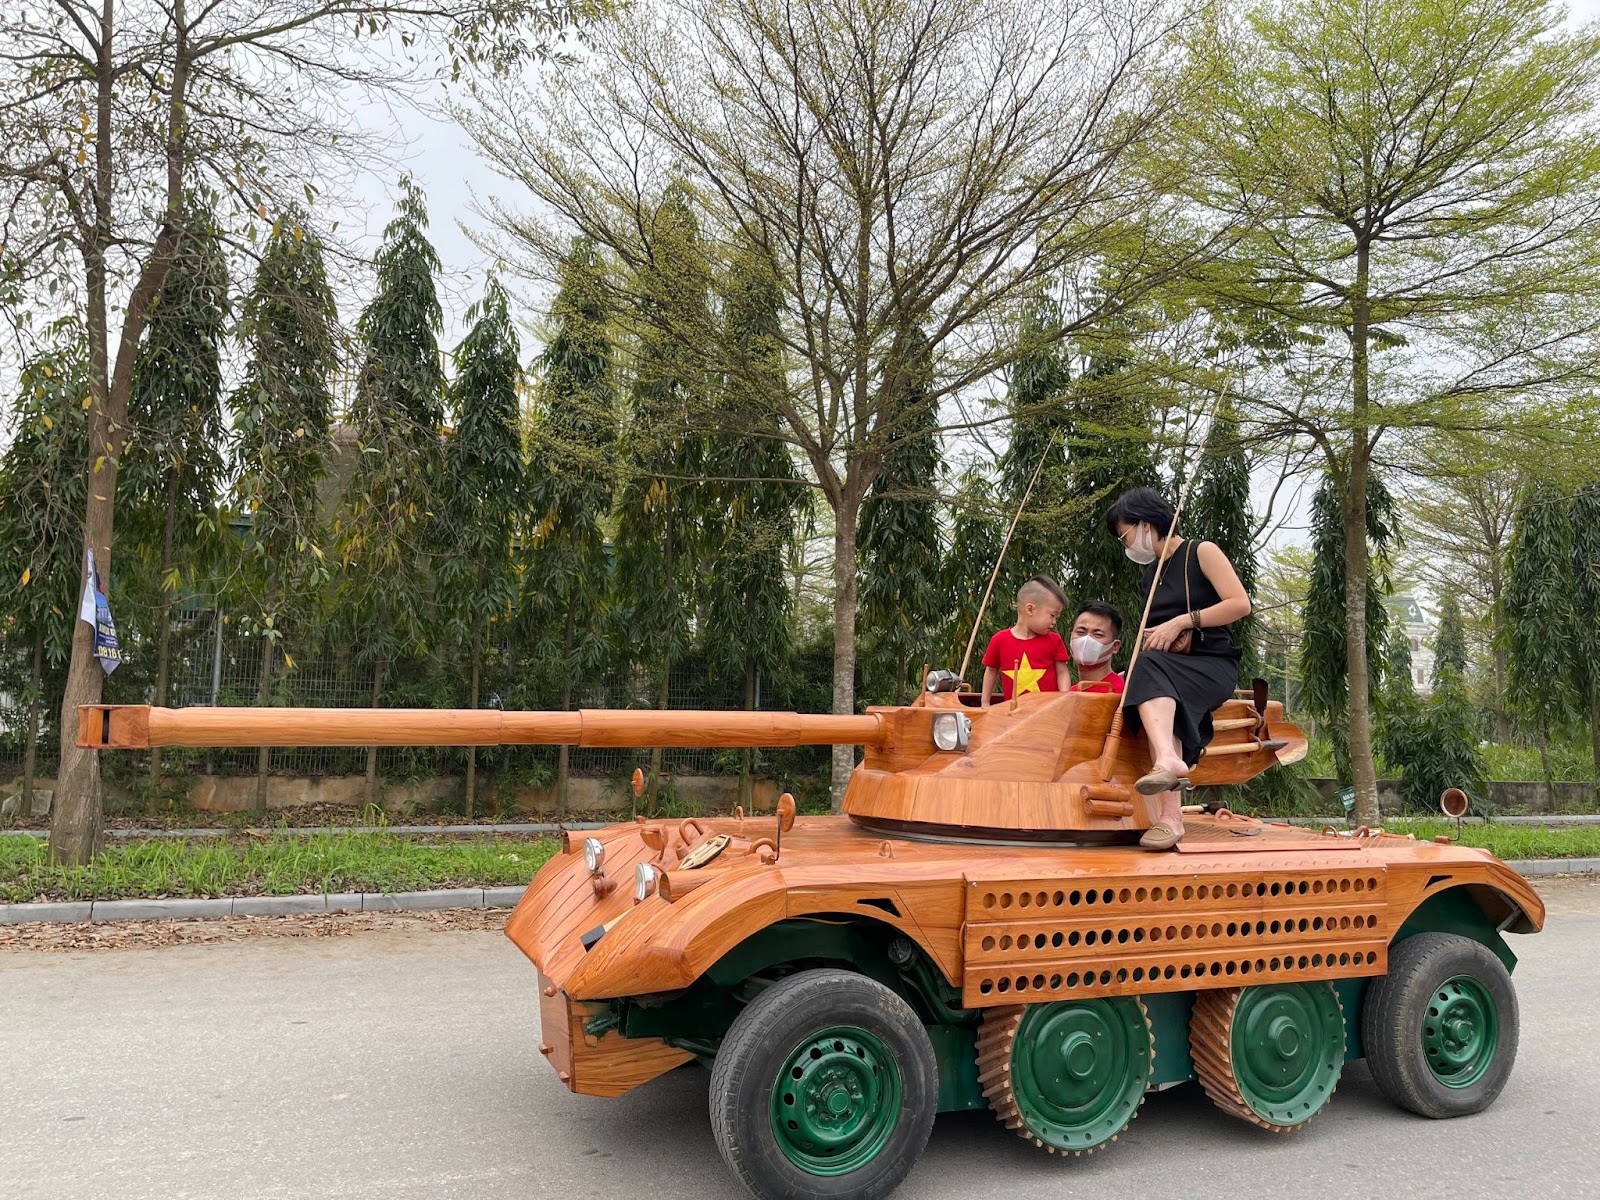 The father in Bac Ninh spent 200 million dong turning an old car into a unique tank - 2